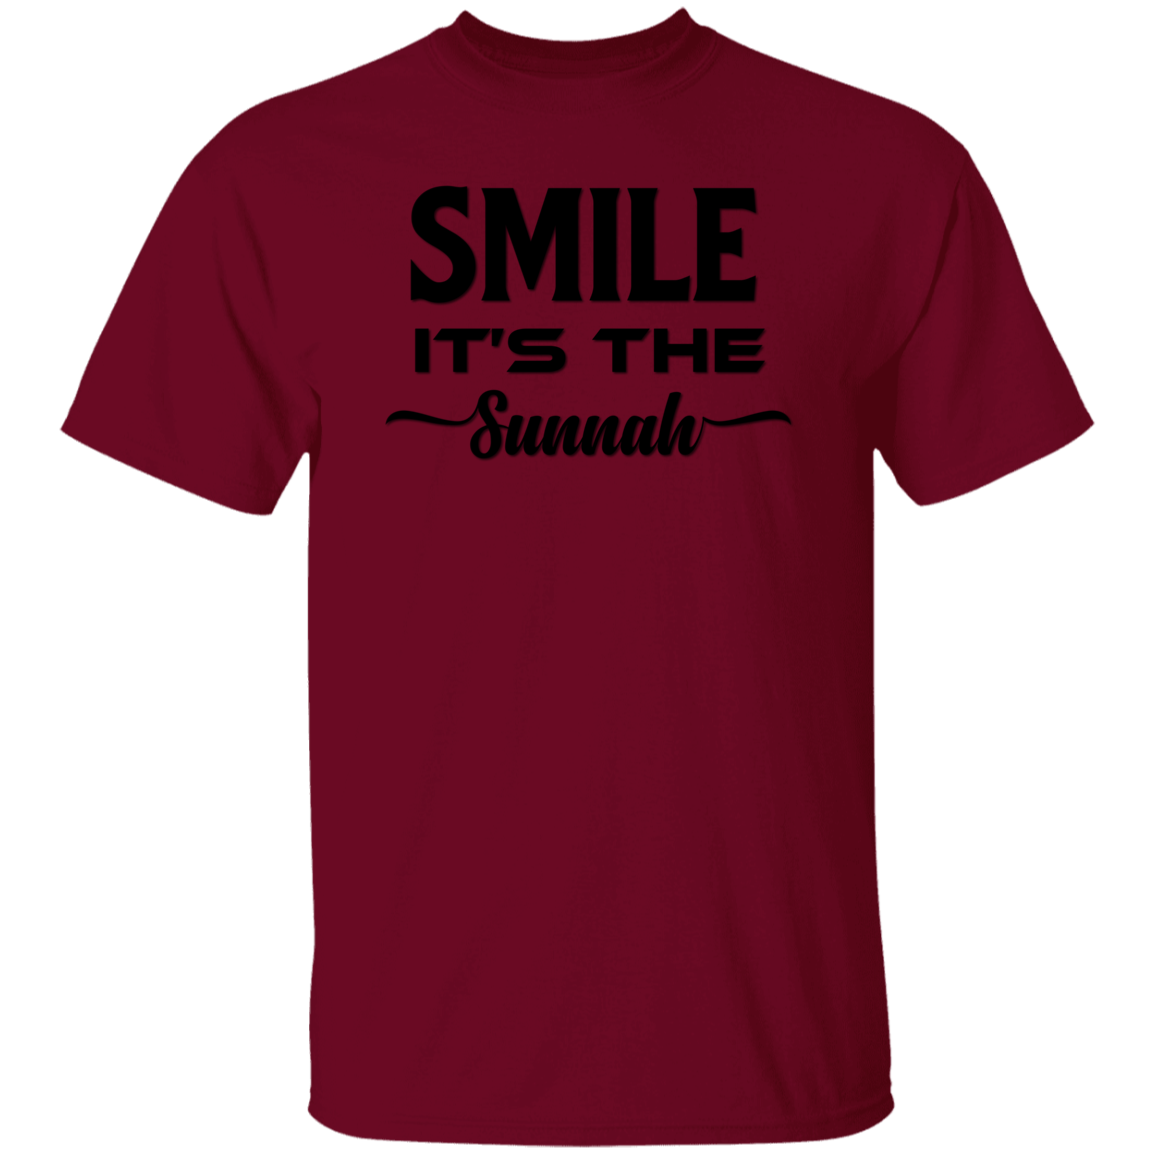 SMILE IT'S THE SUNNAH   T-Shirt (MORE COLOR OPTIONS)